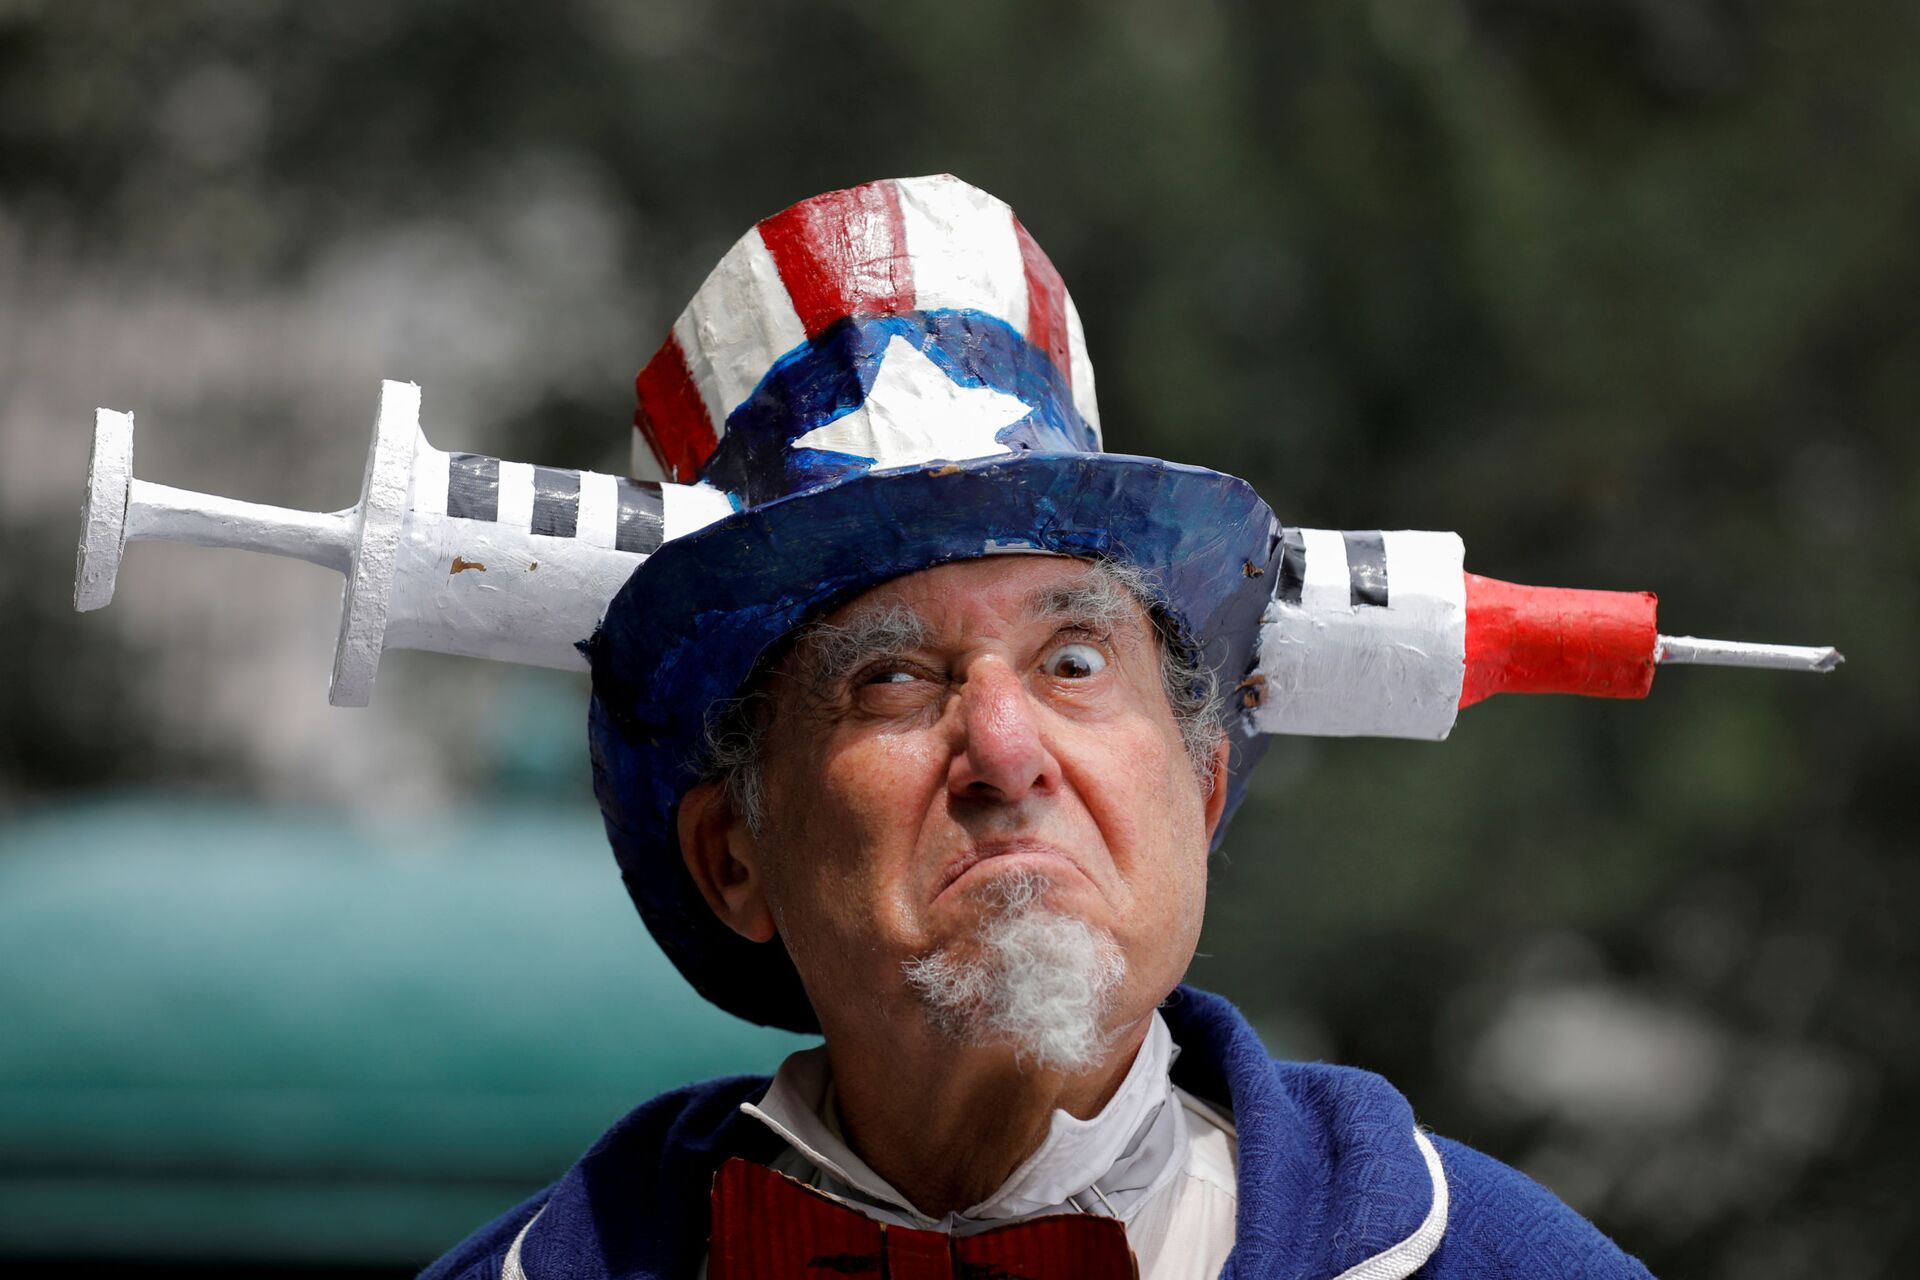 A person dressed as Uncle Sam attends an anti-mandatory coronavirus disease (COVID-19) vaccine protest in New York. - Sputnik International, 1920, 26.12.2021